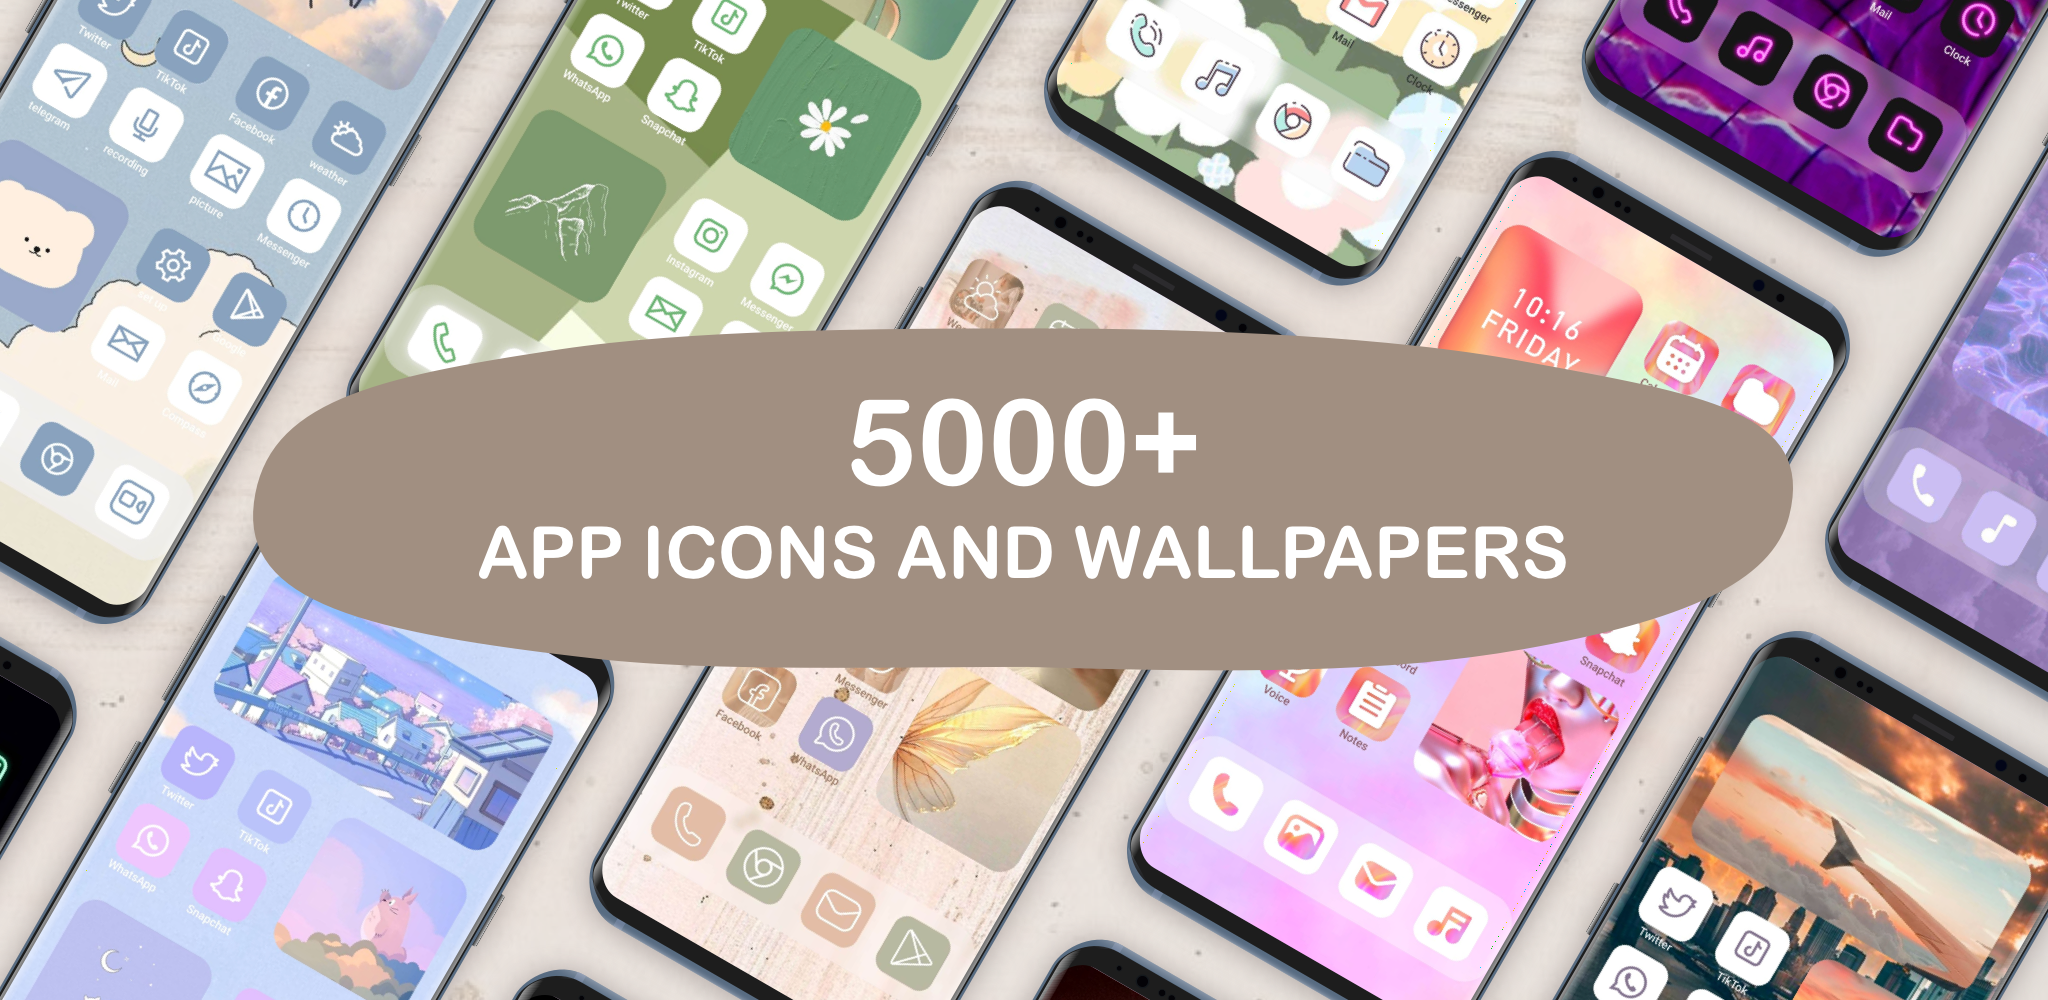 5000+ App Icons and Wallpapers on Themepack